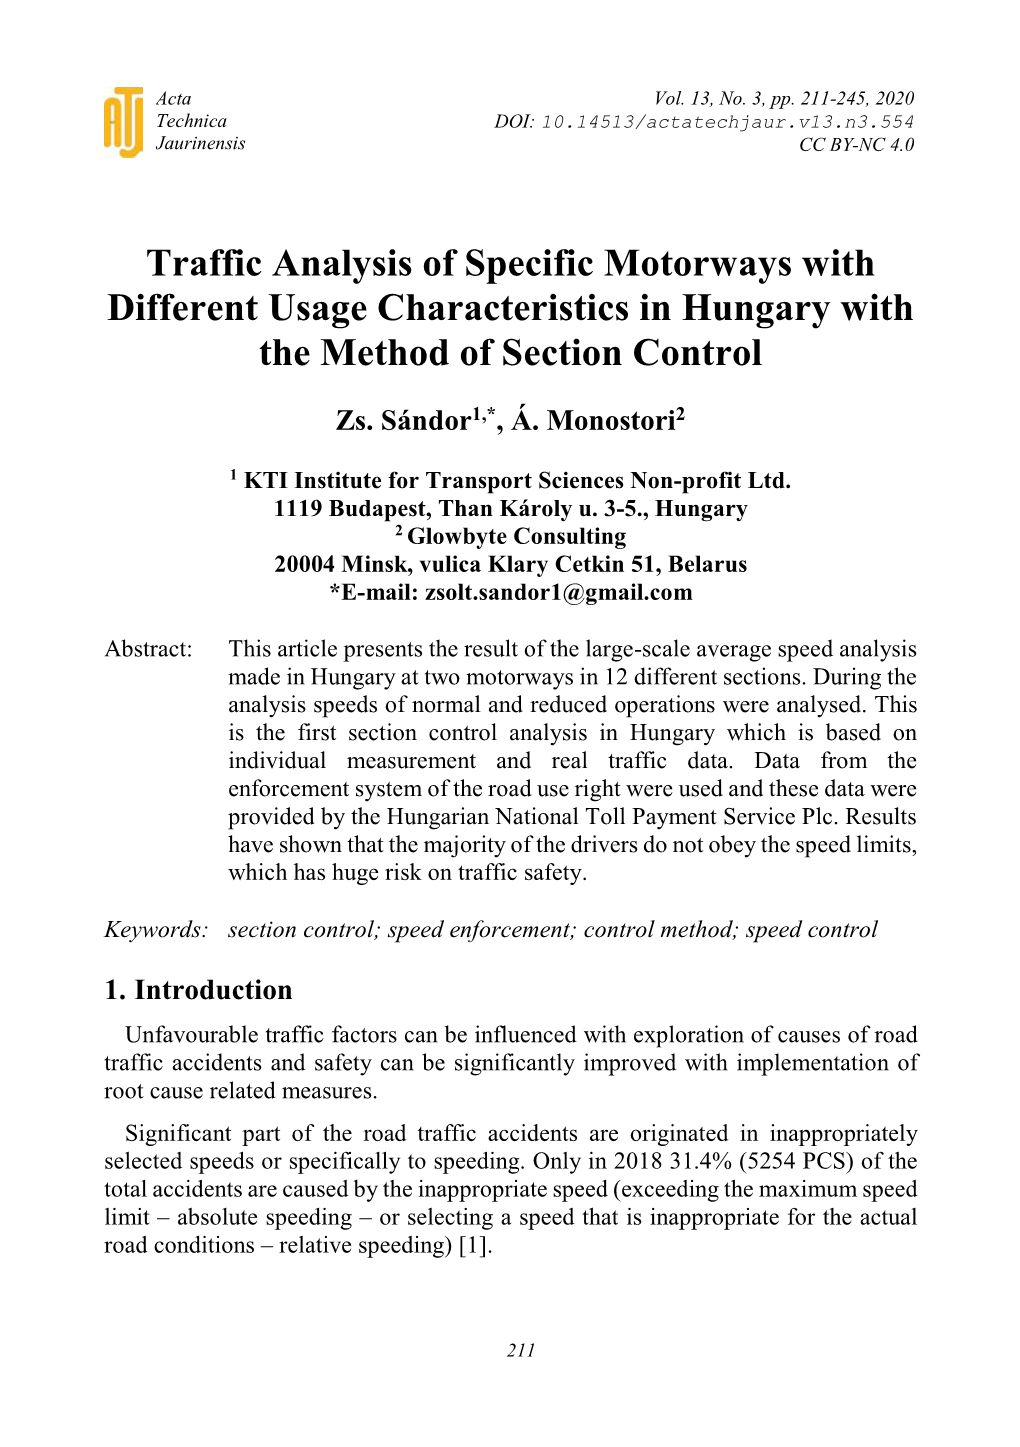 Traffic Analysis of Specific Motorways with Different Usage Characteristics in Hungary with the Method of Section Control